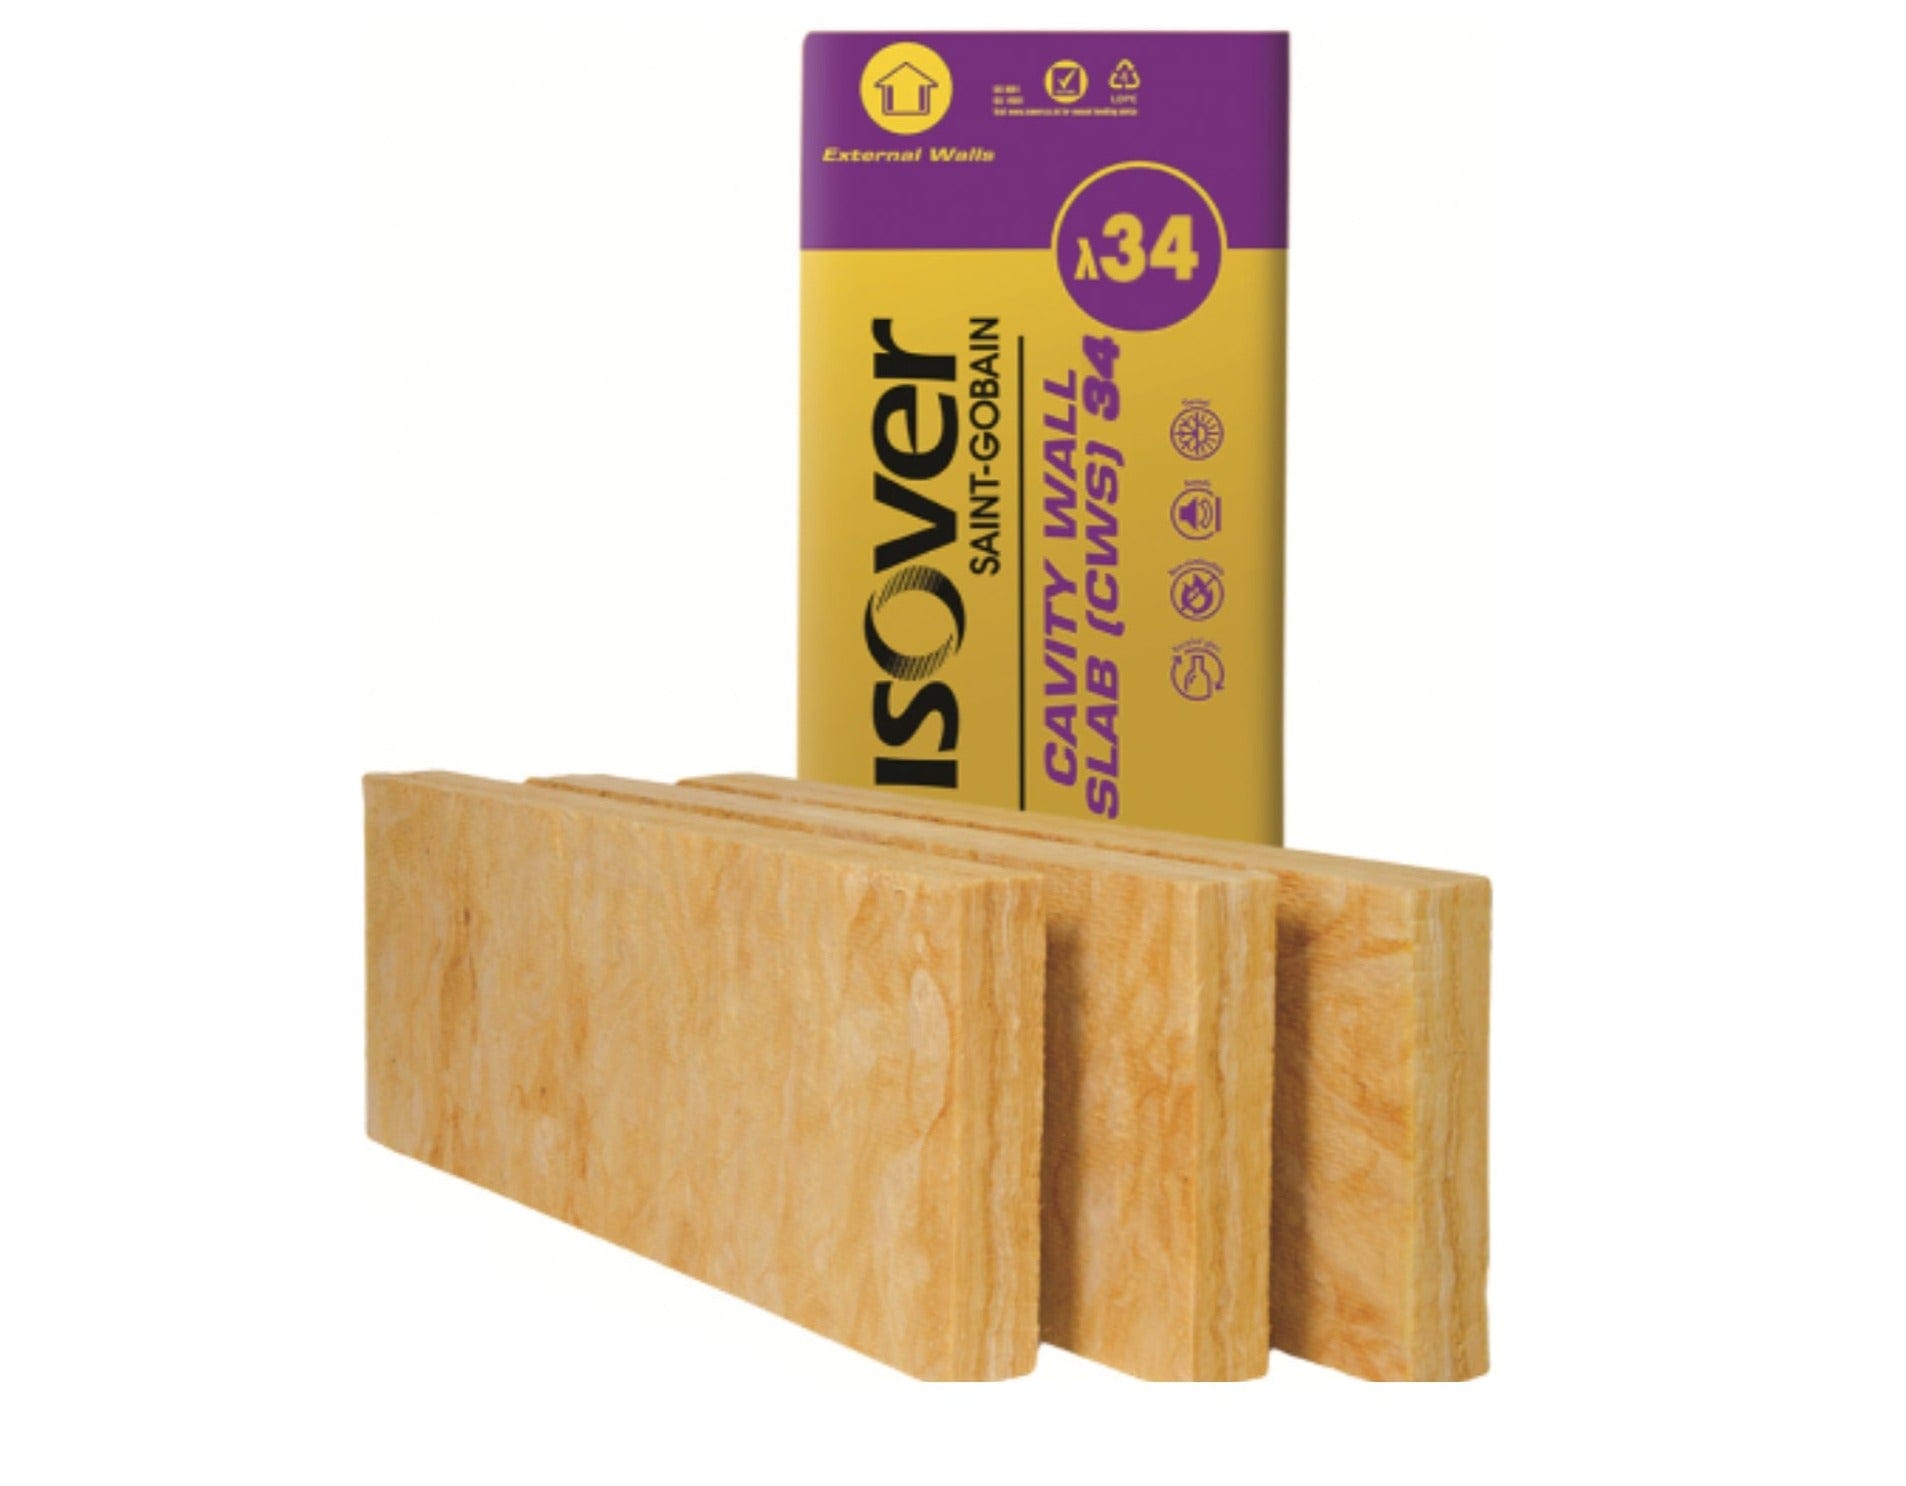 Isover Insulation 75 x 455 x 1200mm - 10 Slabs - 5.46m2 Isover Cavity Wall Slab CWS 34 Isover Cavity Wall Slab CWS 34 - insulationuk.co.uk